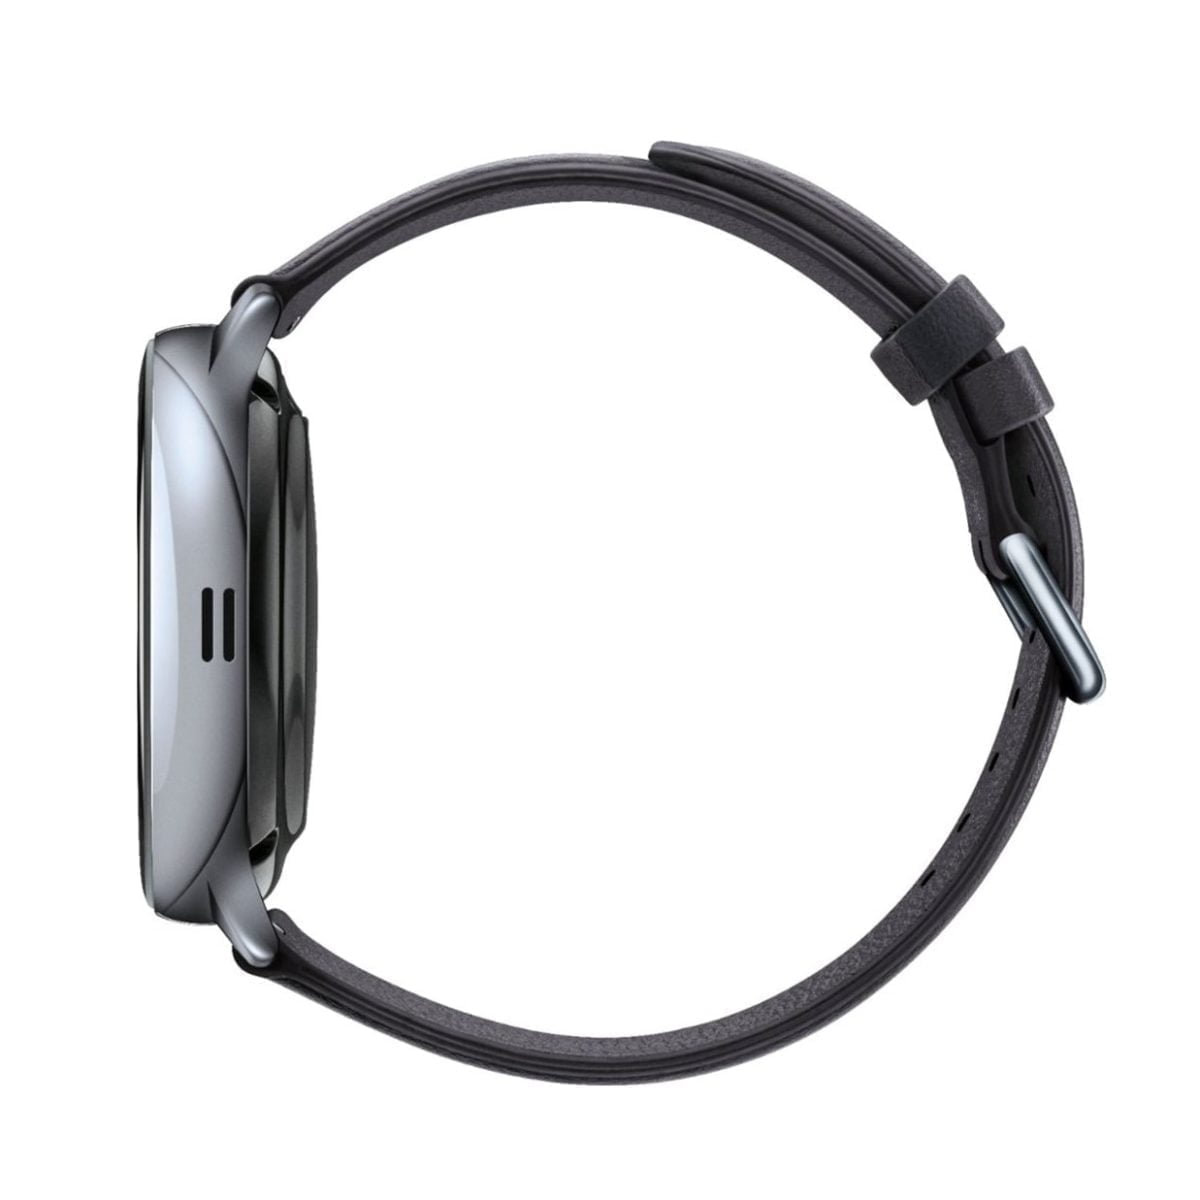 6360446Cv11D Samsung &Lt;H1 Class=&Quot;Heading-5 V-Fw-Regular&Quot;&Gt;Samsung - Galaxy Watch Active2 Smartwatch 44Mm Aluminum - Silver &Lt;Strong&Gt;Model&Lt;/Strong&Gt;: Sm-R825Ussaxar&Lt;/H1&Gt; Https://Www.youtube.com/Watch?V=Cu0-Lhyhgu4 &Lt;Div Class=&Quot;Long-Description-Container Body-Copy &Quot;&Gt; &Lt;Div Class=&Quot;Html-Fragment&Quot;&Gt; &Lt;Div&Gt; &Lt;Div&Gt;Enhance Your Sporting Performance With This Samsung Galaxy Watch Active2 Bluetooth Smartwatch. Monitor Your Workouts And Receive Detailed Reports On Your Performance Even As The Running Coach Feature Gives You Important Insight In Real-Time. This Samsung Galaxy Watch Active2 Bluetooth Smartwatch Analyses Your Sleep Pattern And Offers Helpful Advice On How To Improve It.&Lt;/Div&Gt; &Lt;/Div&Gt; &Lt;/Div&Gt; &Lt;/Div&Gt; Samsung Galaxy Watch Active2 Samsung Galaxy Watch Active2 Smartwatch 44Mm Aluminum - Silver